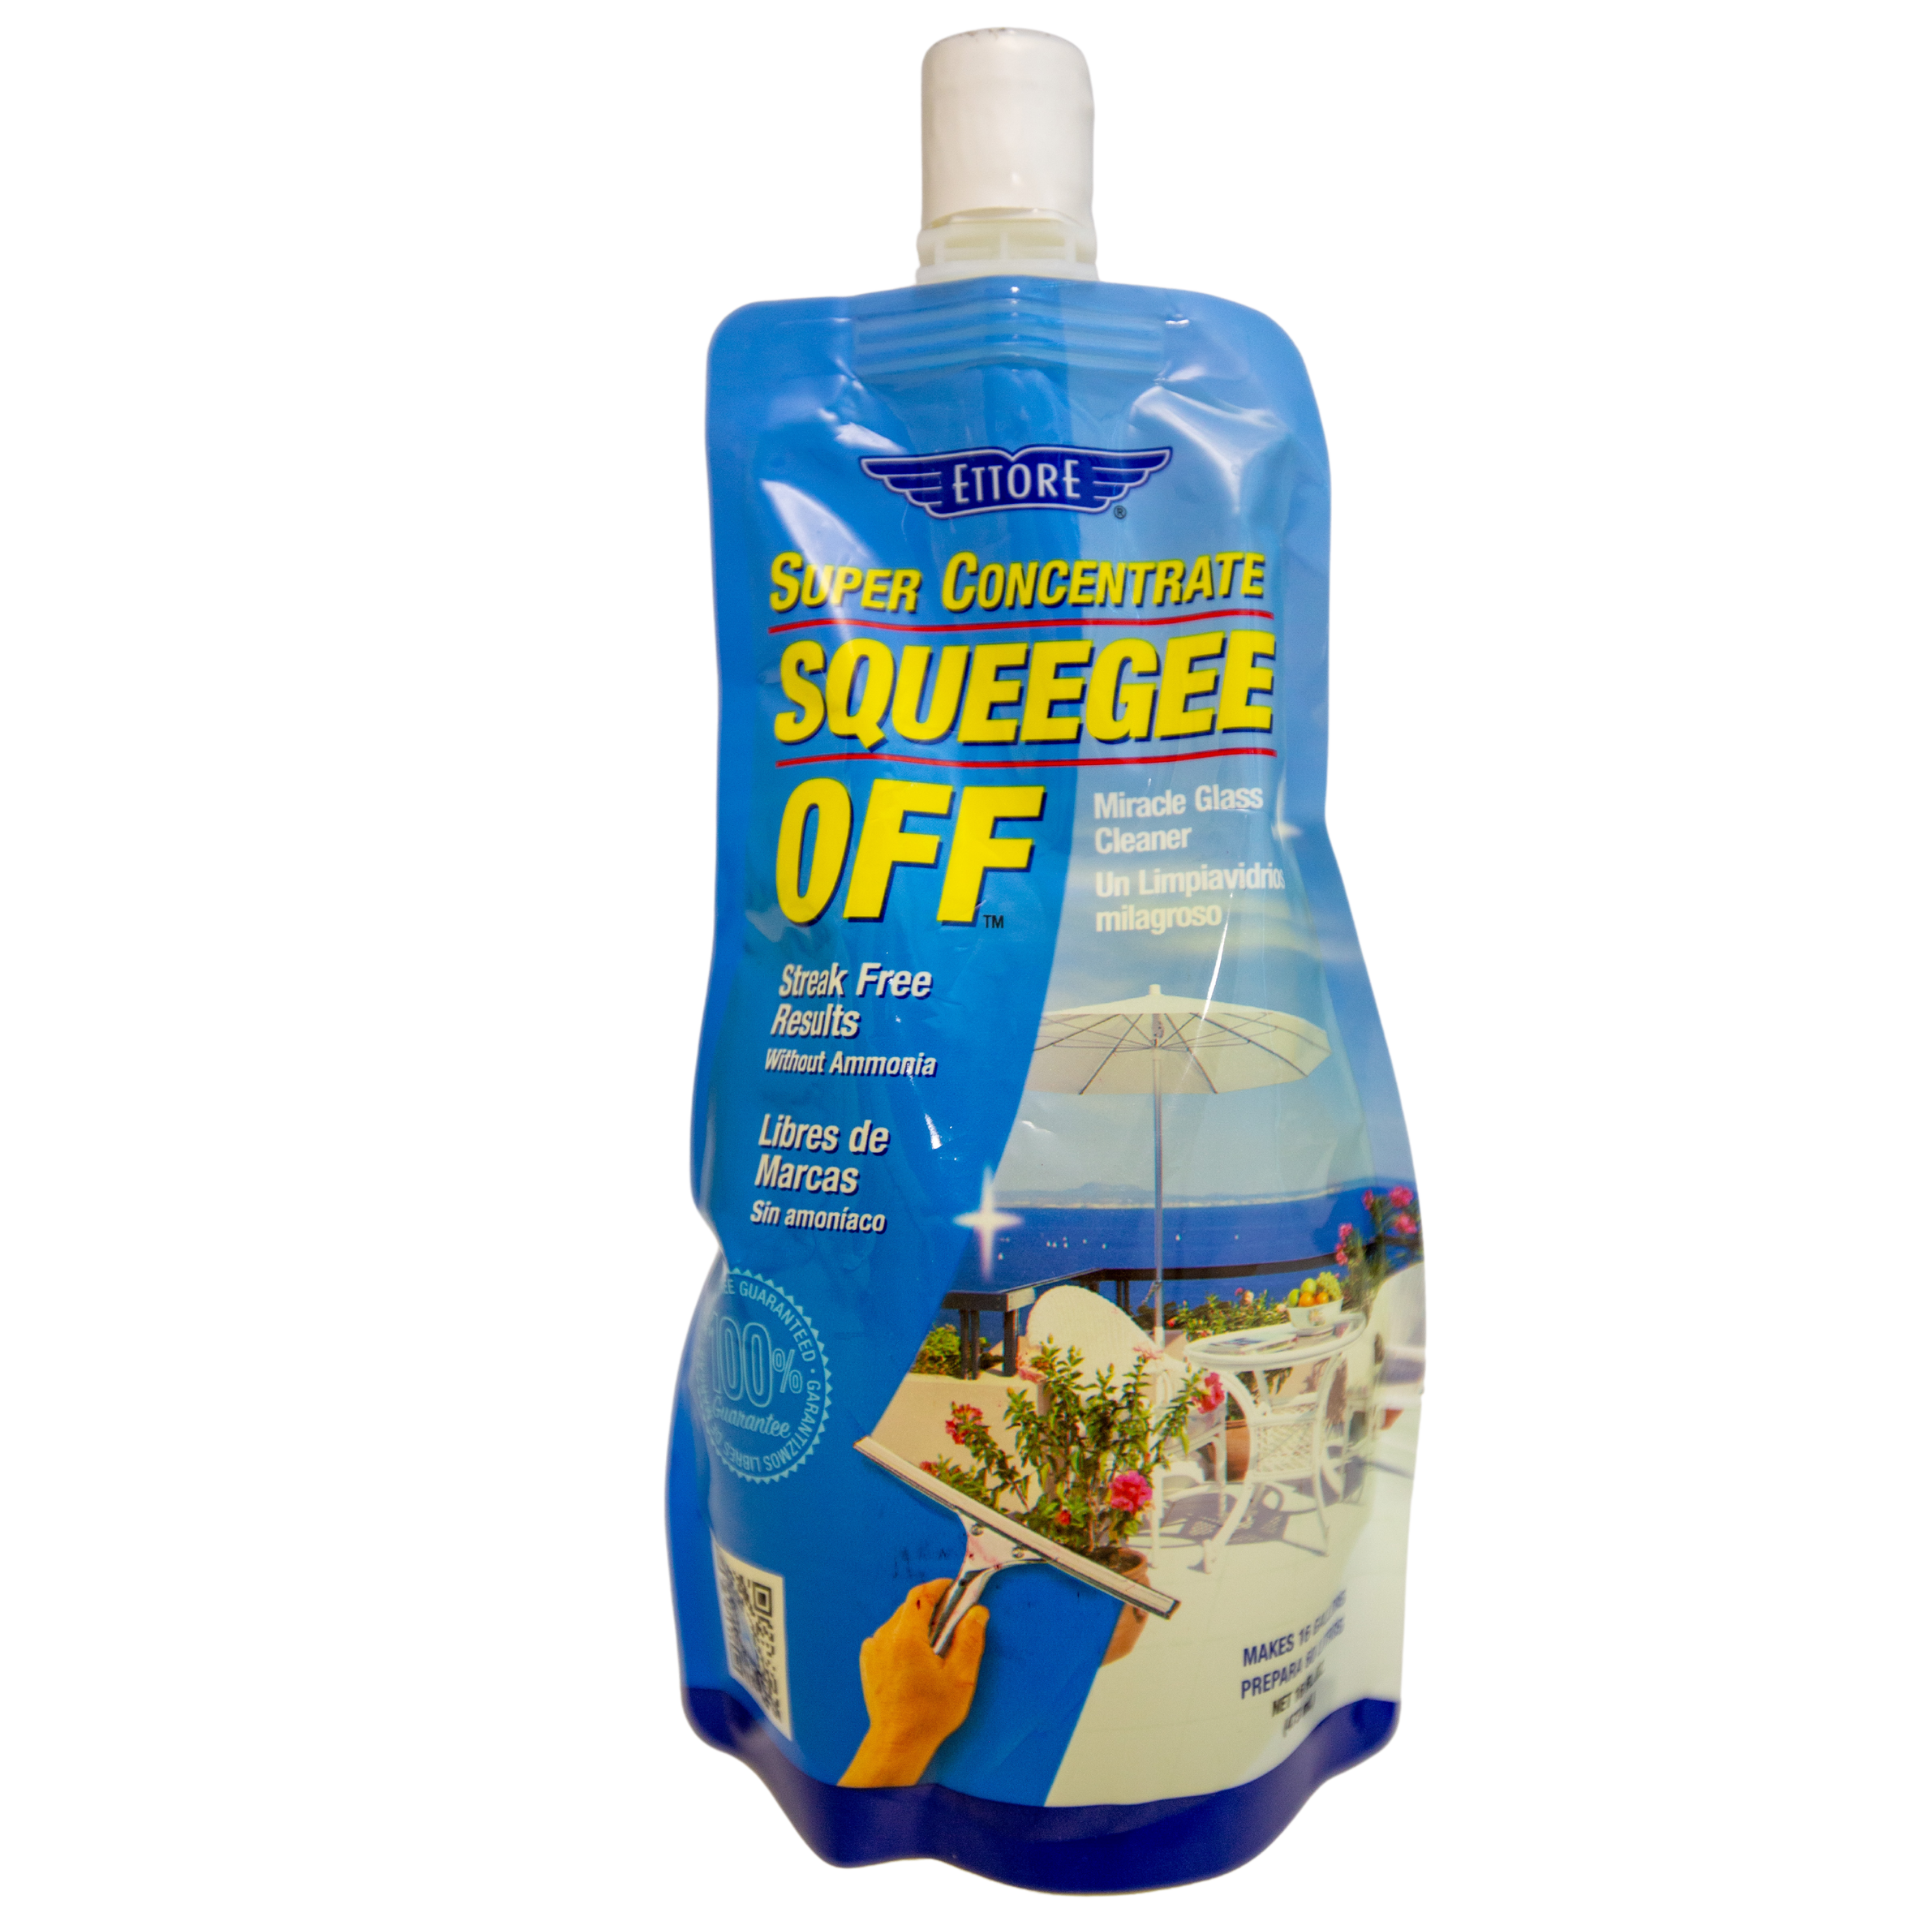 Once-Over Paste - Water Spot Remover freeshipping - Windows101 1 Quart